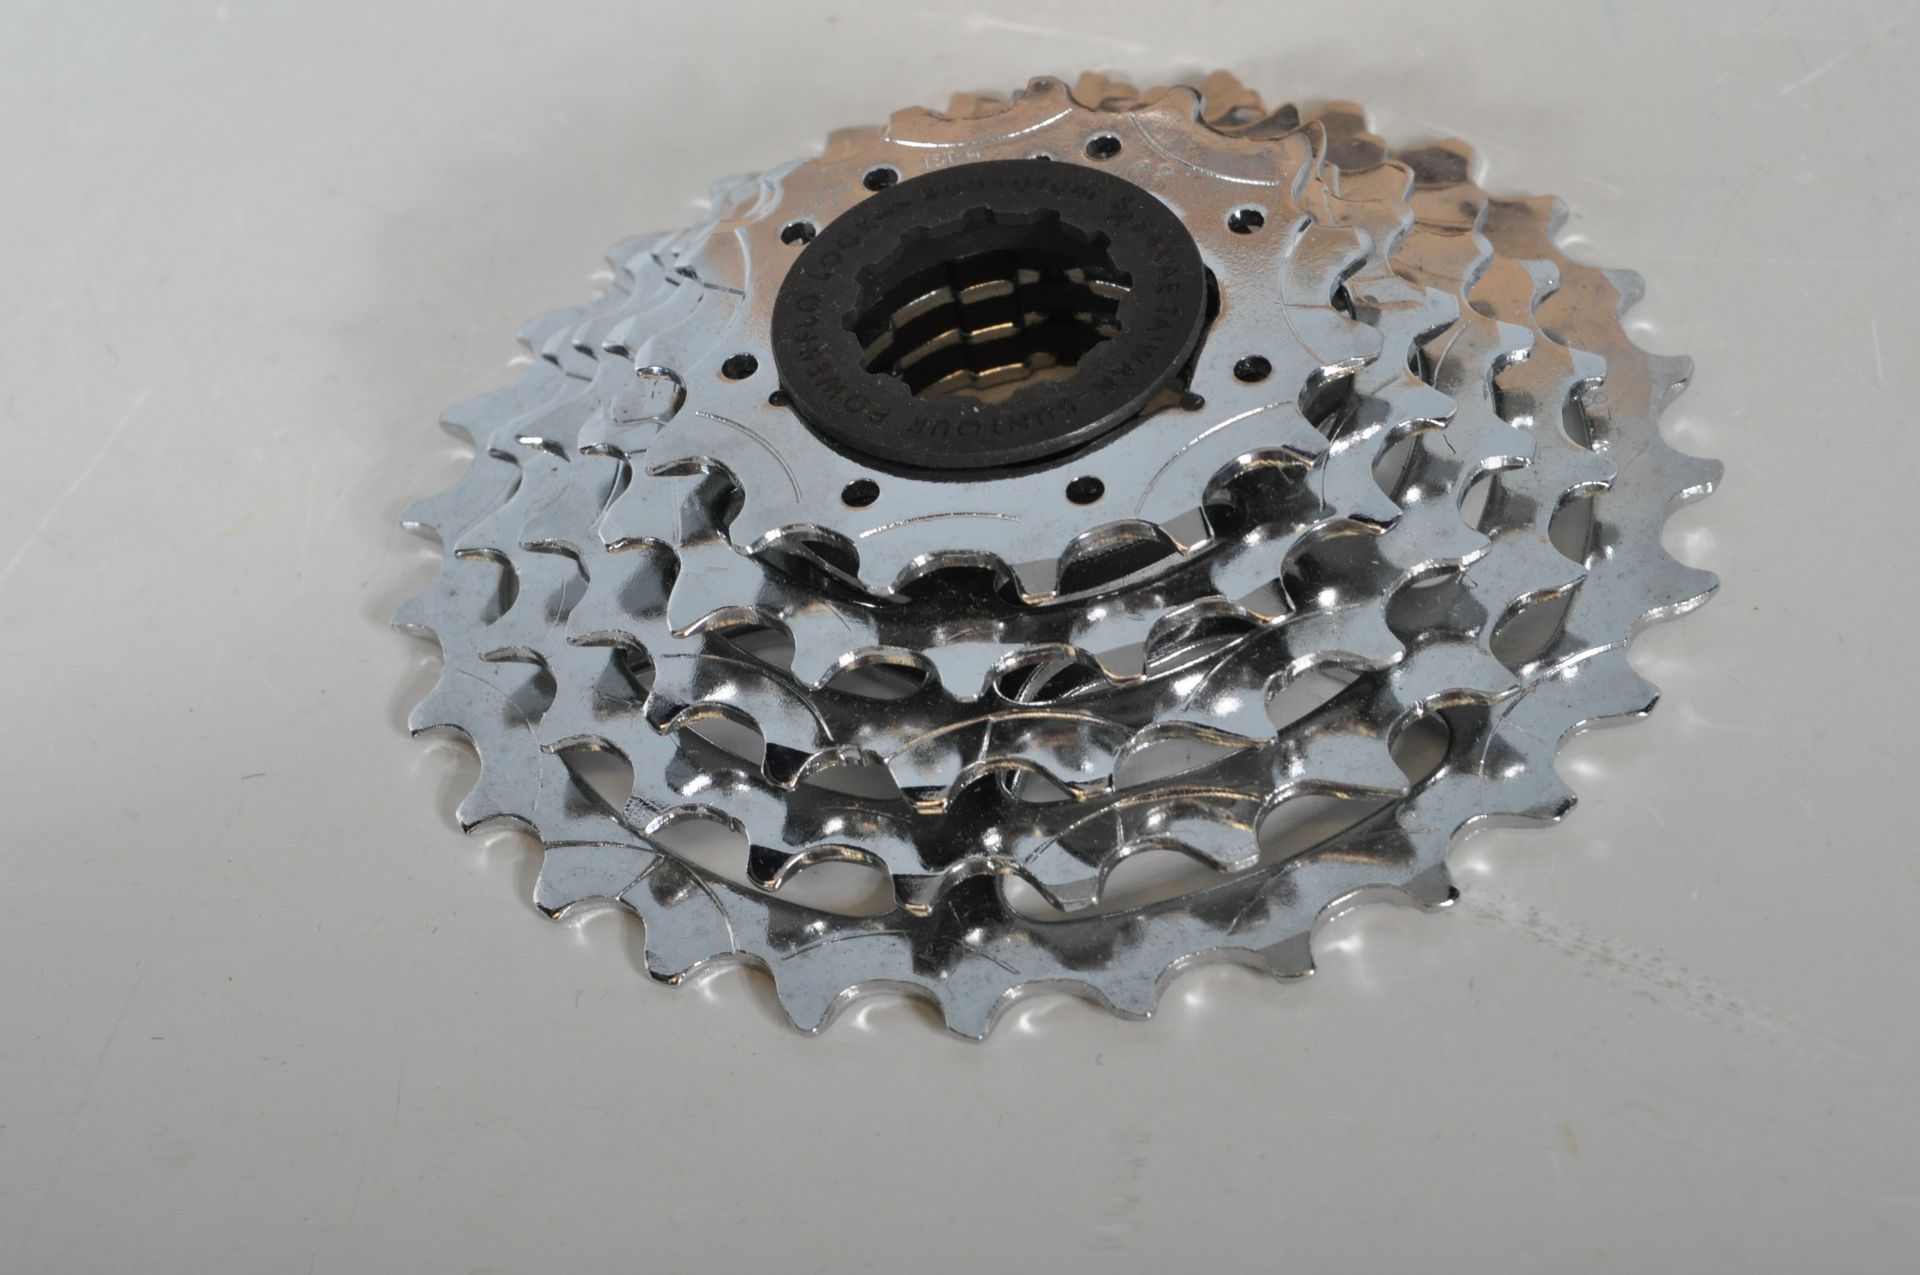 VINTAGE BICYCLES AND SPARES - SET OF NOS RACING BIKE GEARS - Image 6 of 9